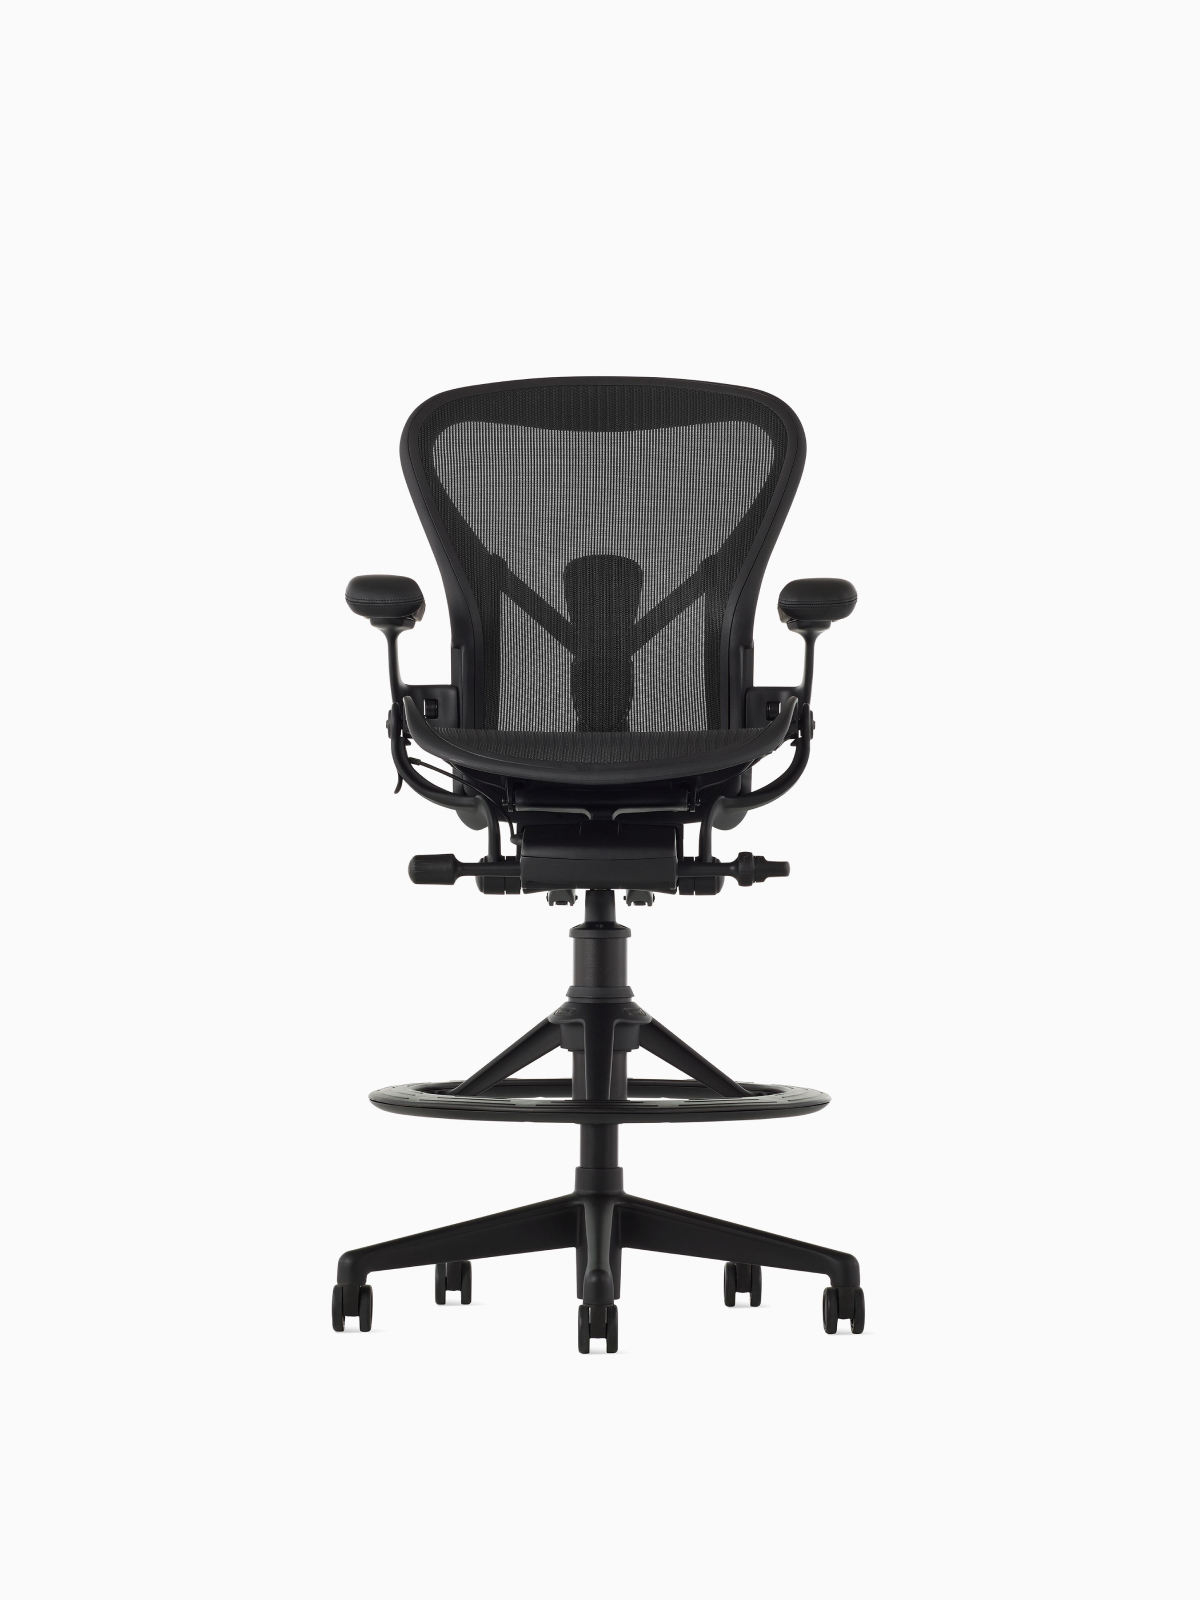 Single Aeron stool on a white background viewed from the front